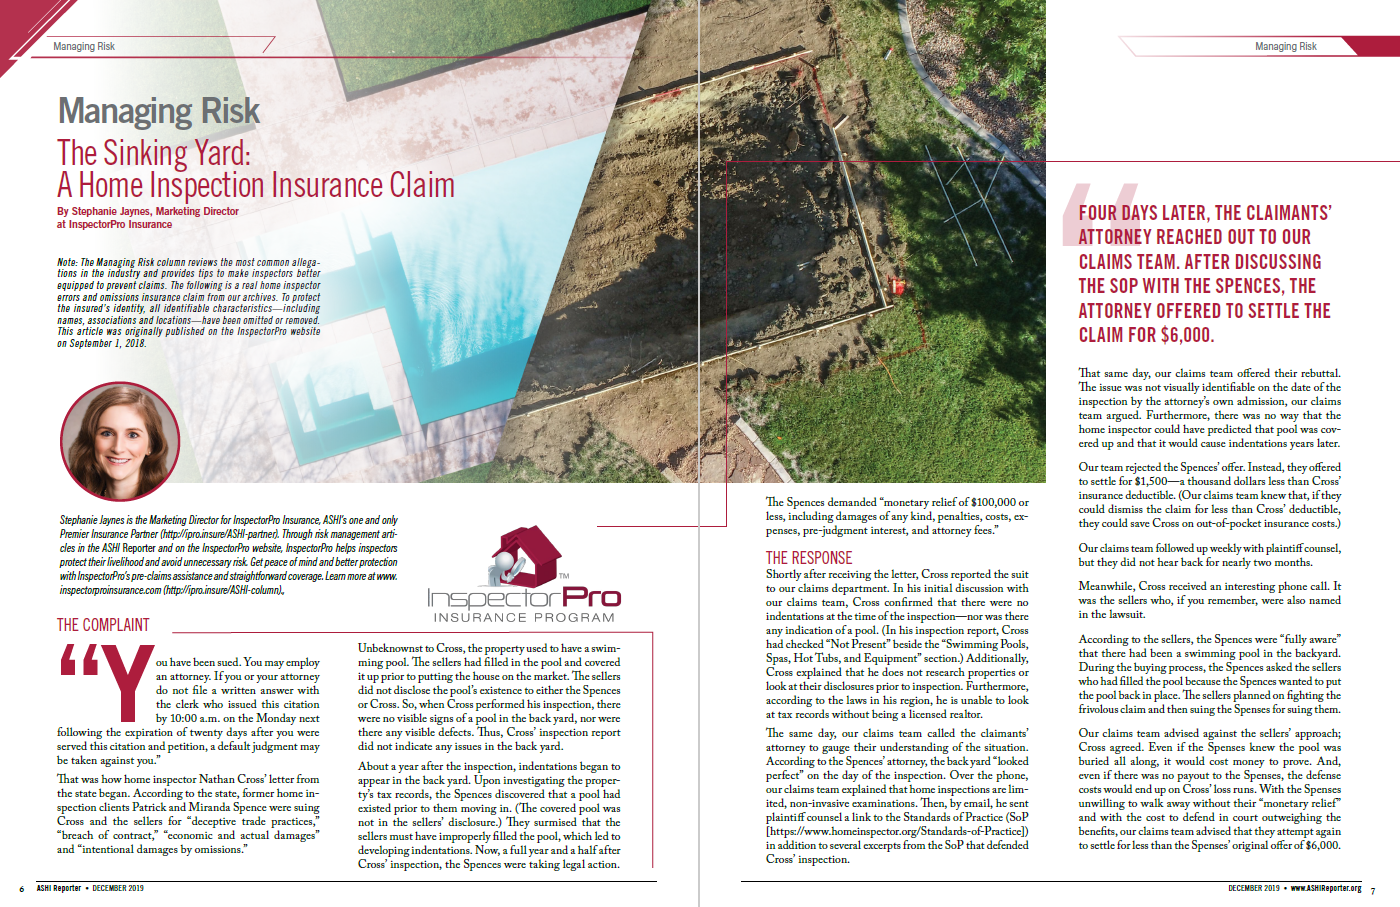 Picture of sinking yard claim article